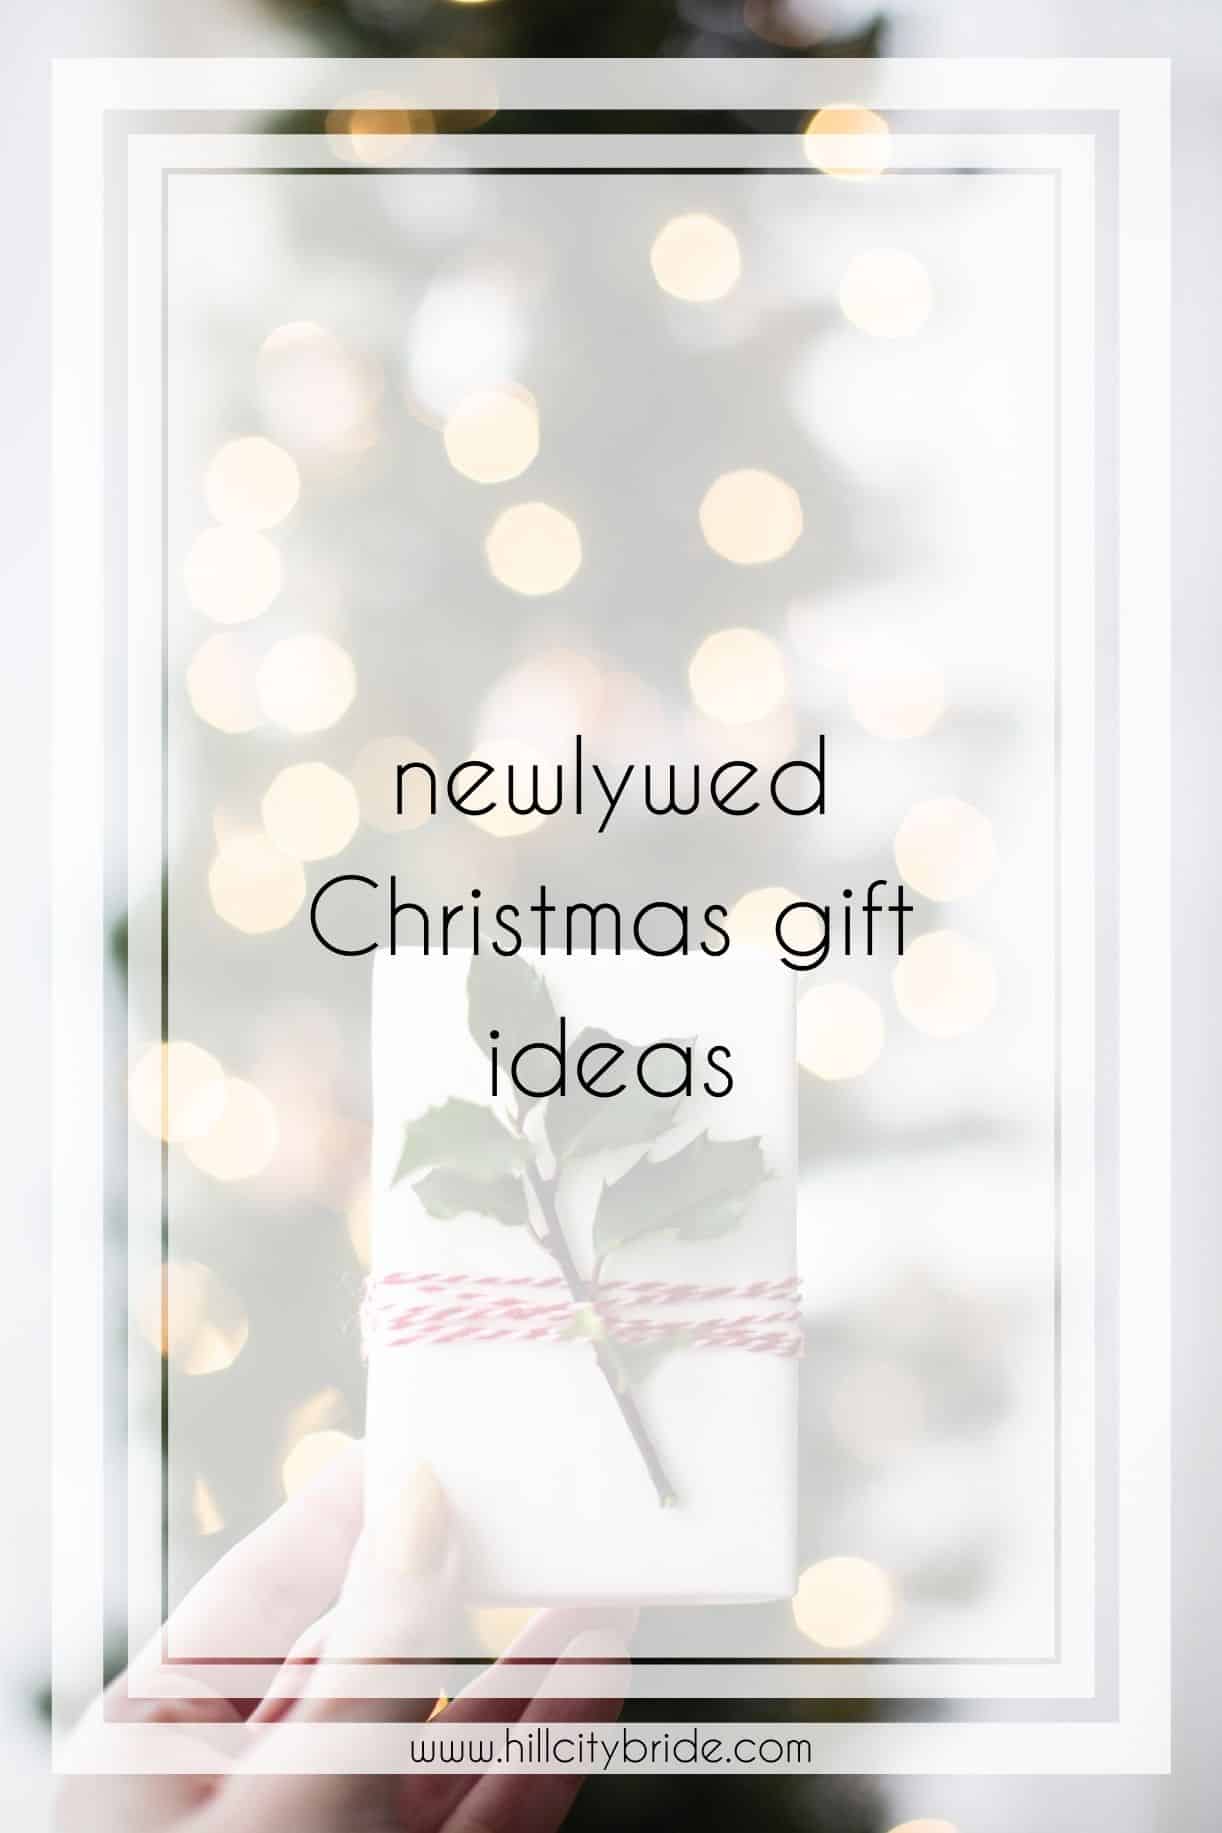 Our 10 Amazing Newlywed Gifts for Christmas are Perfect for Any Couple